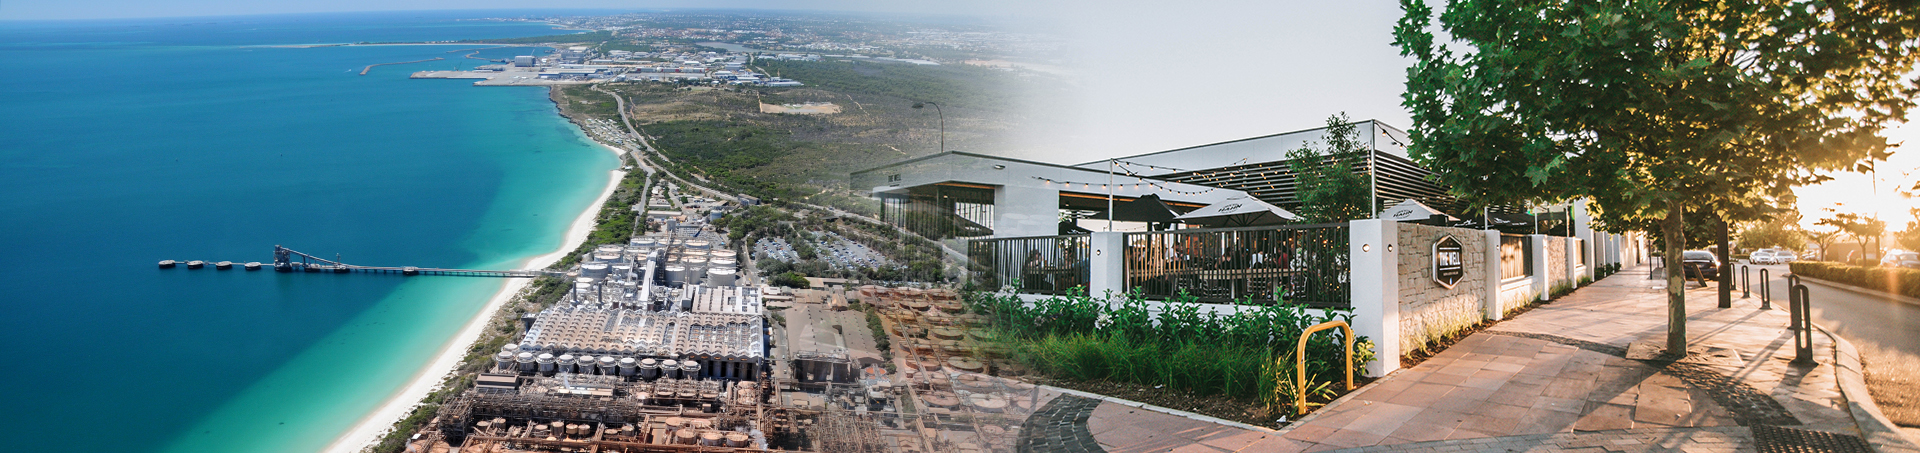 An image of the Kwinana industrial area by the ocean blends into an image of The Well Tavern.